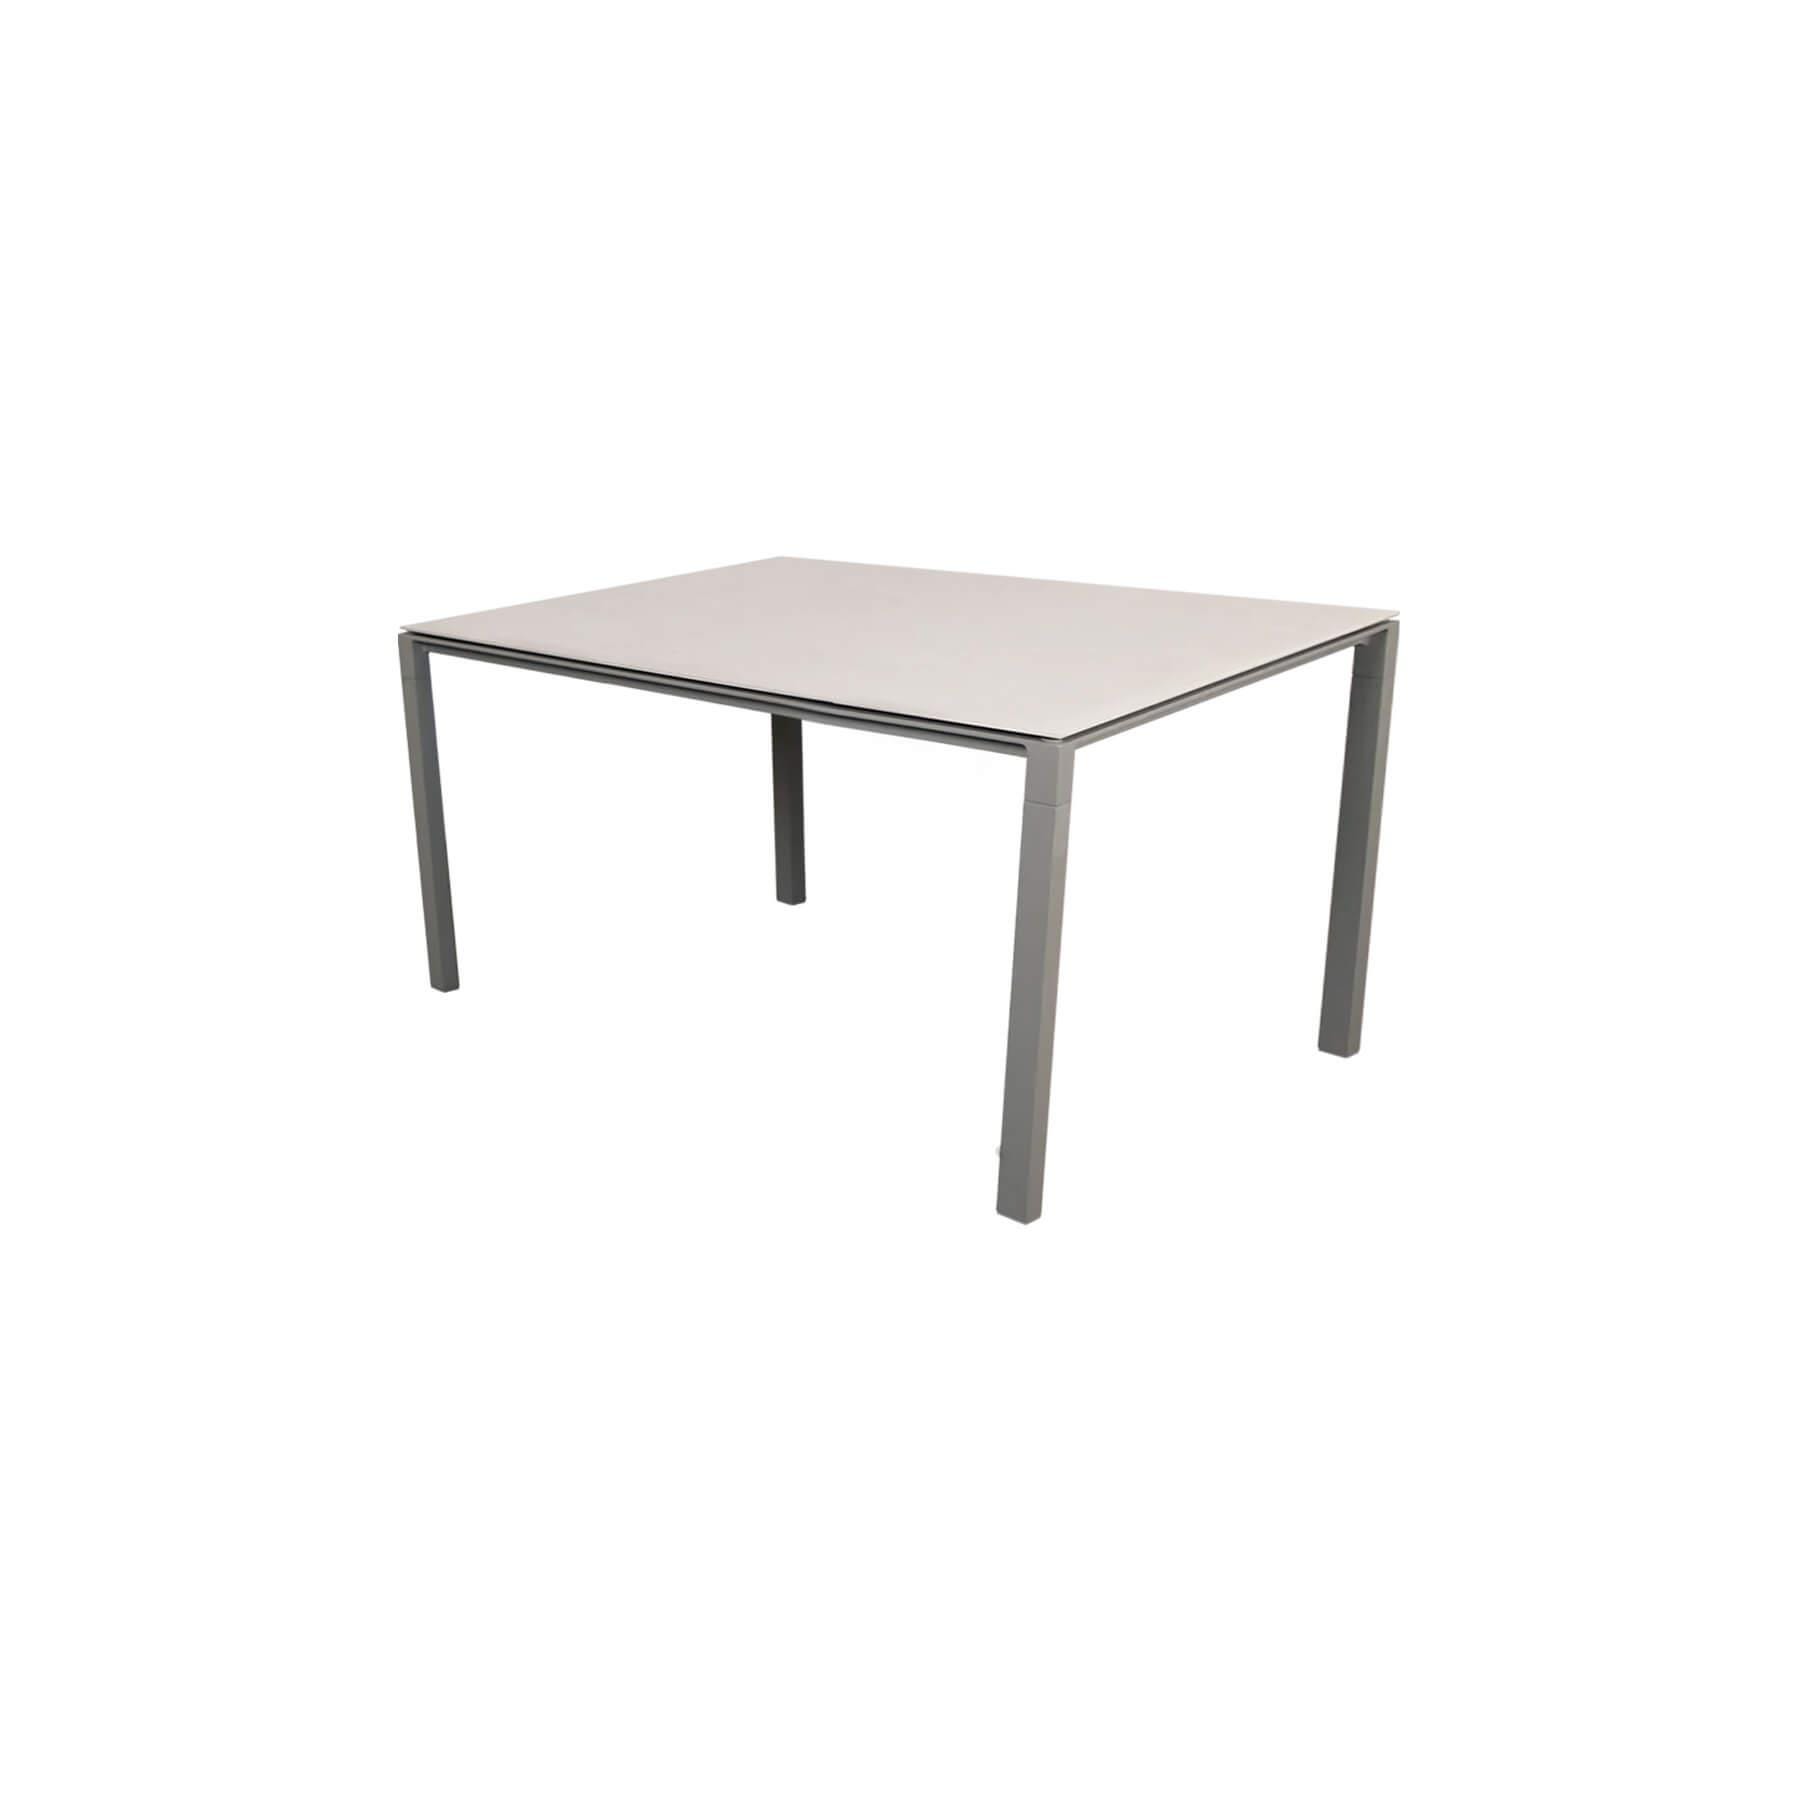 Caneline Pure Outdoor Dining Table Small Ceramic Toscana Sand Top Taupe Legs Grey